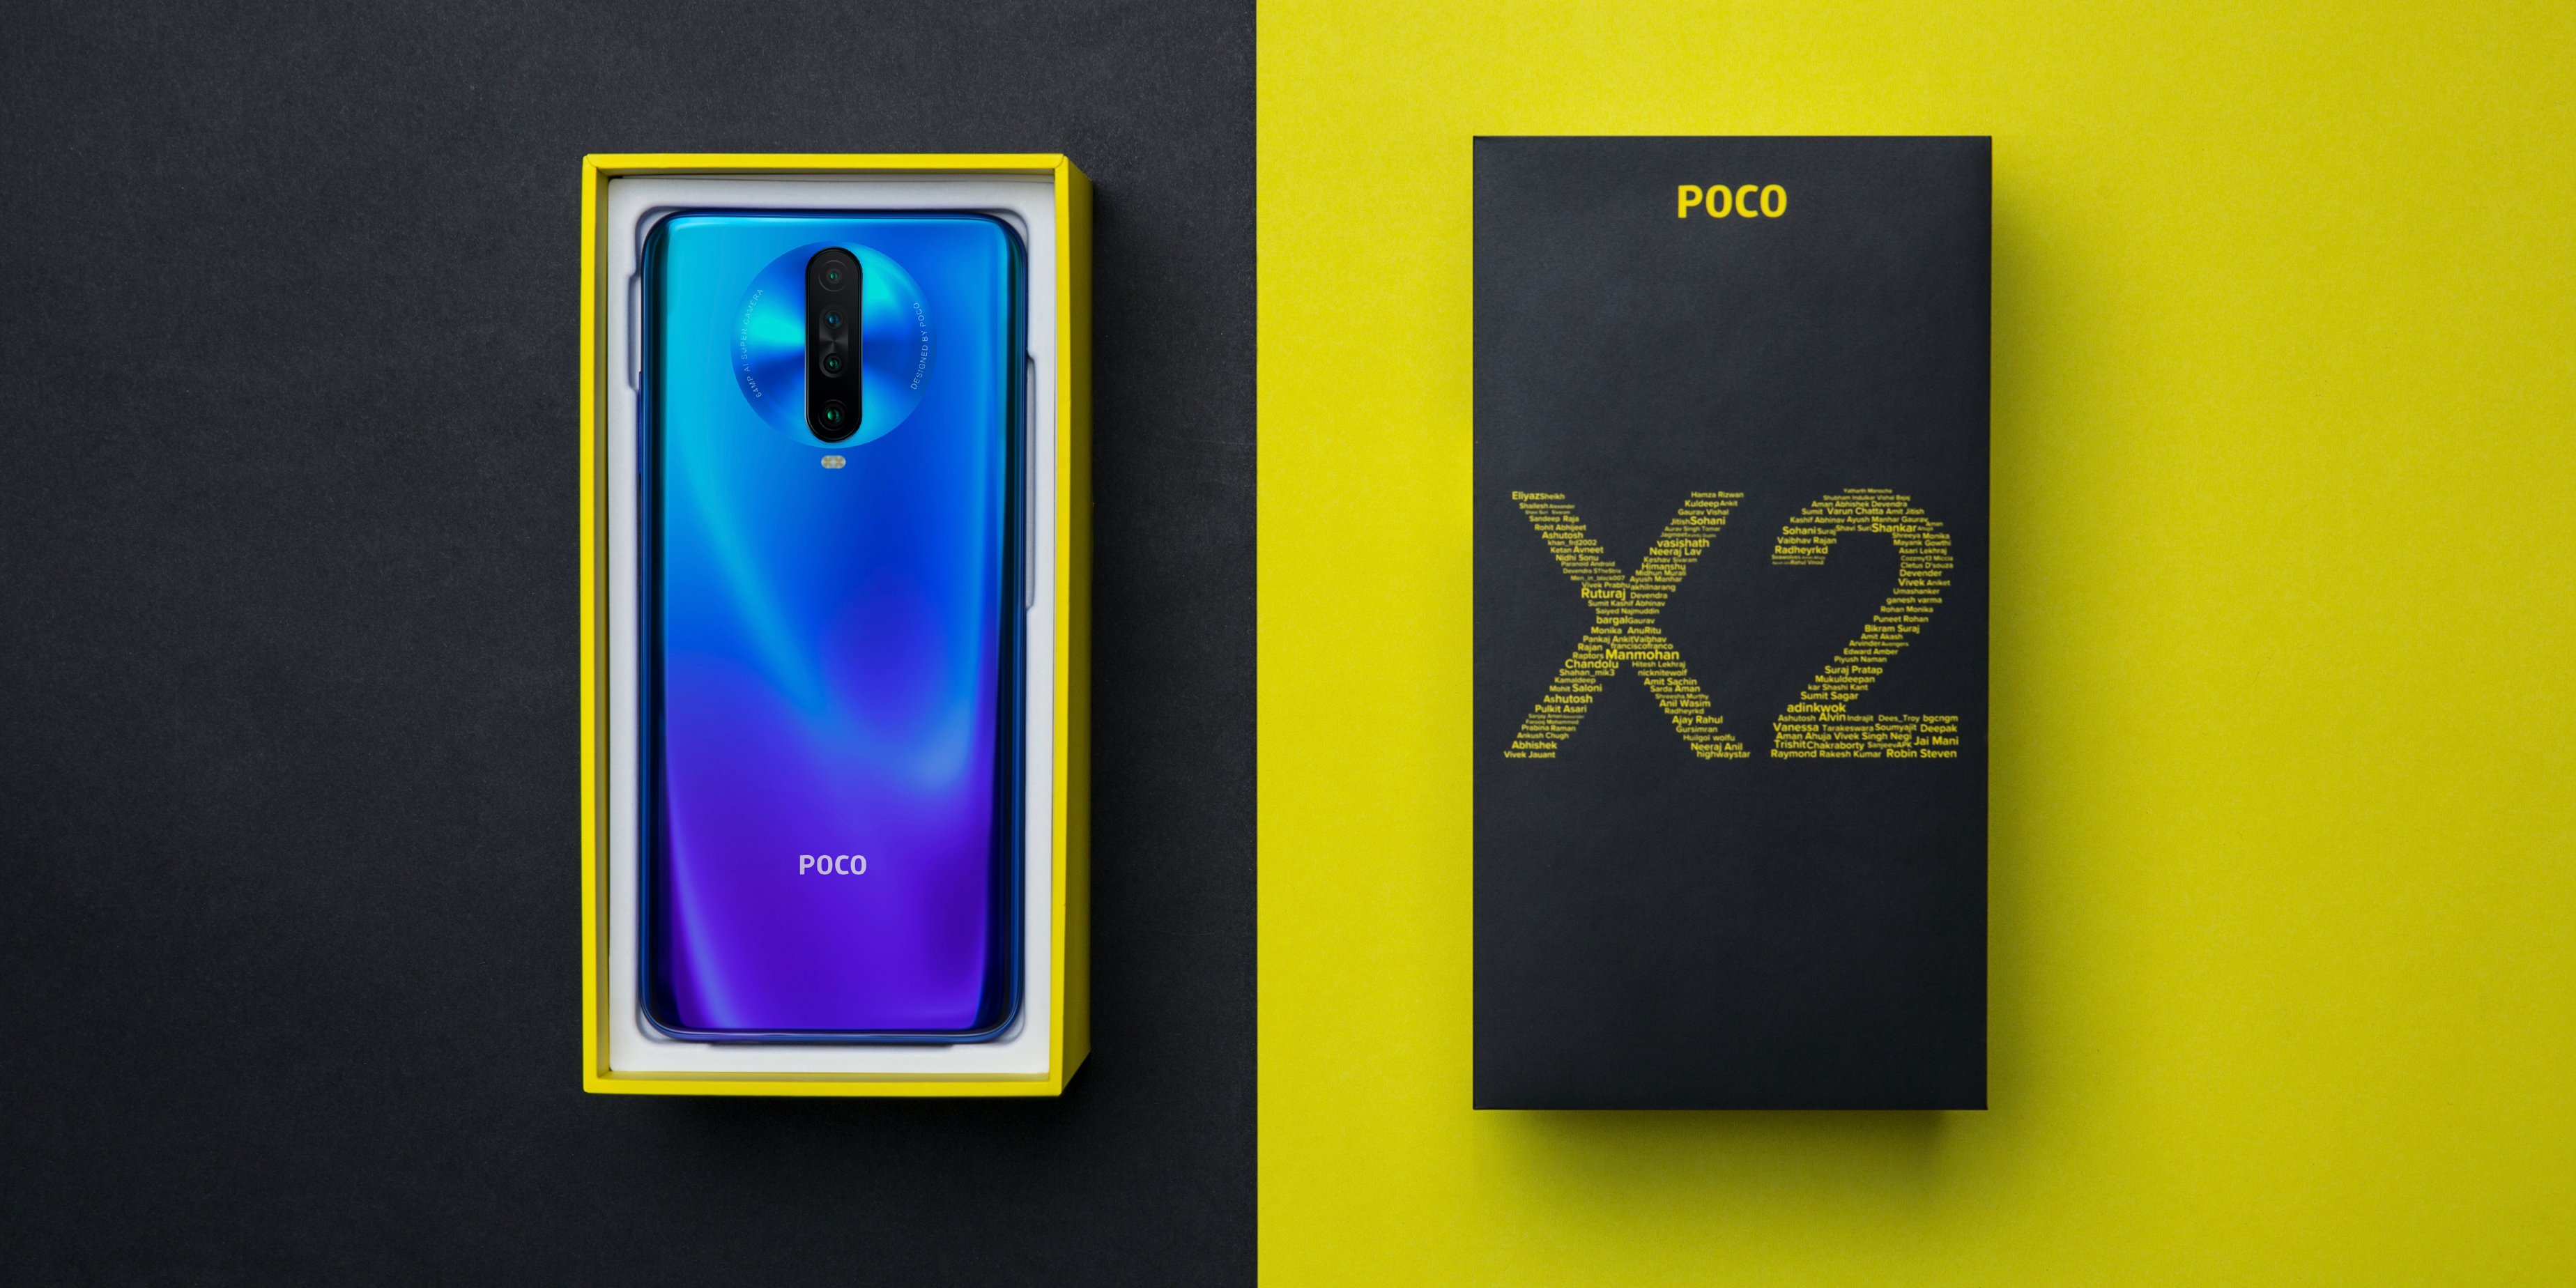 POCO X2 released for usd225 with 120Hz display, 64MP IMX686 Snapdragon 730G